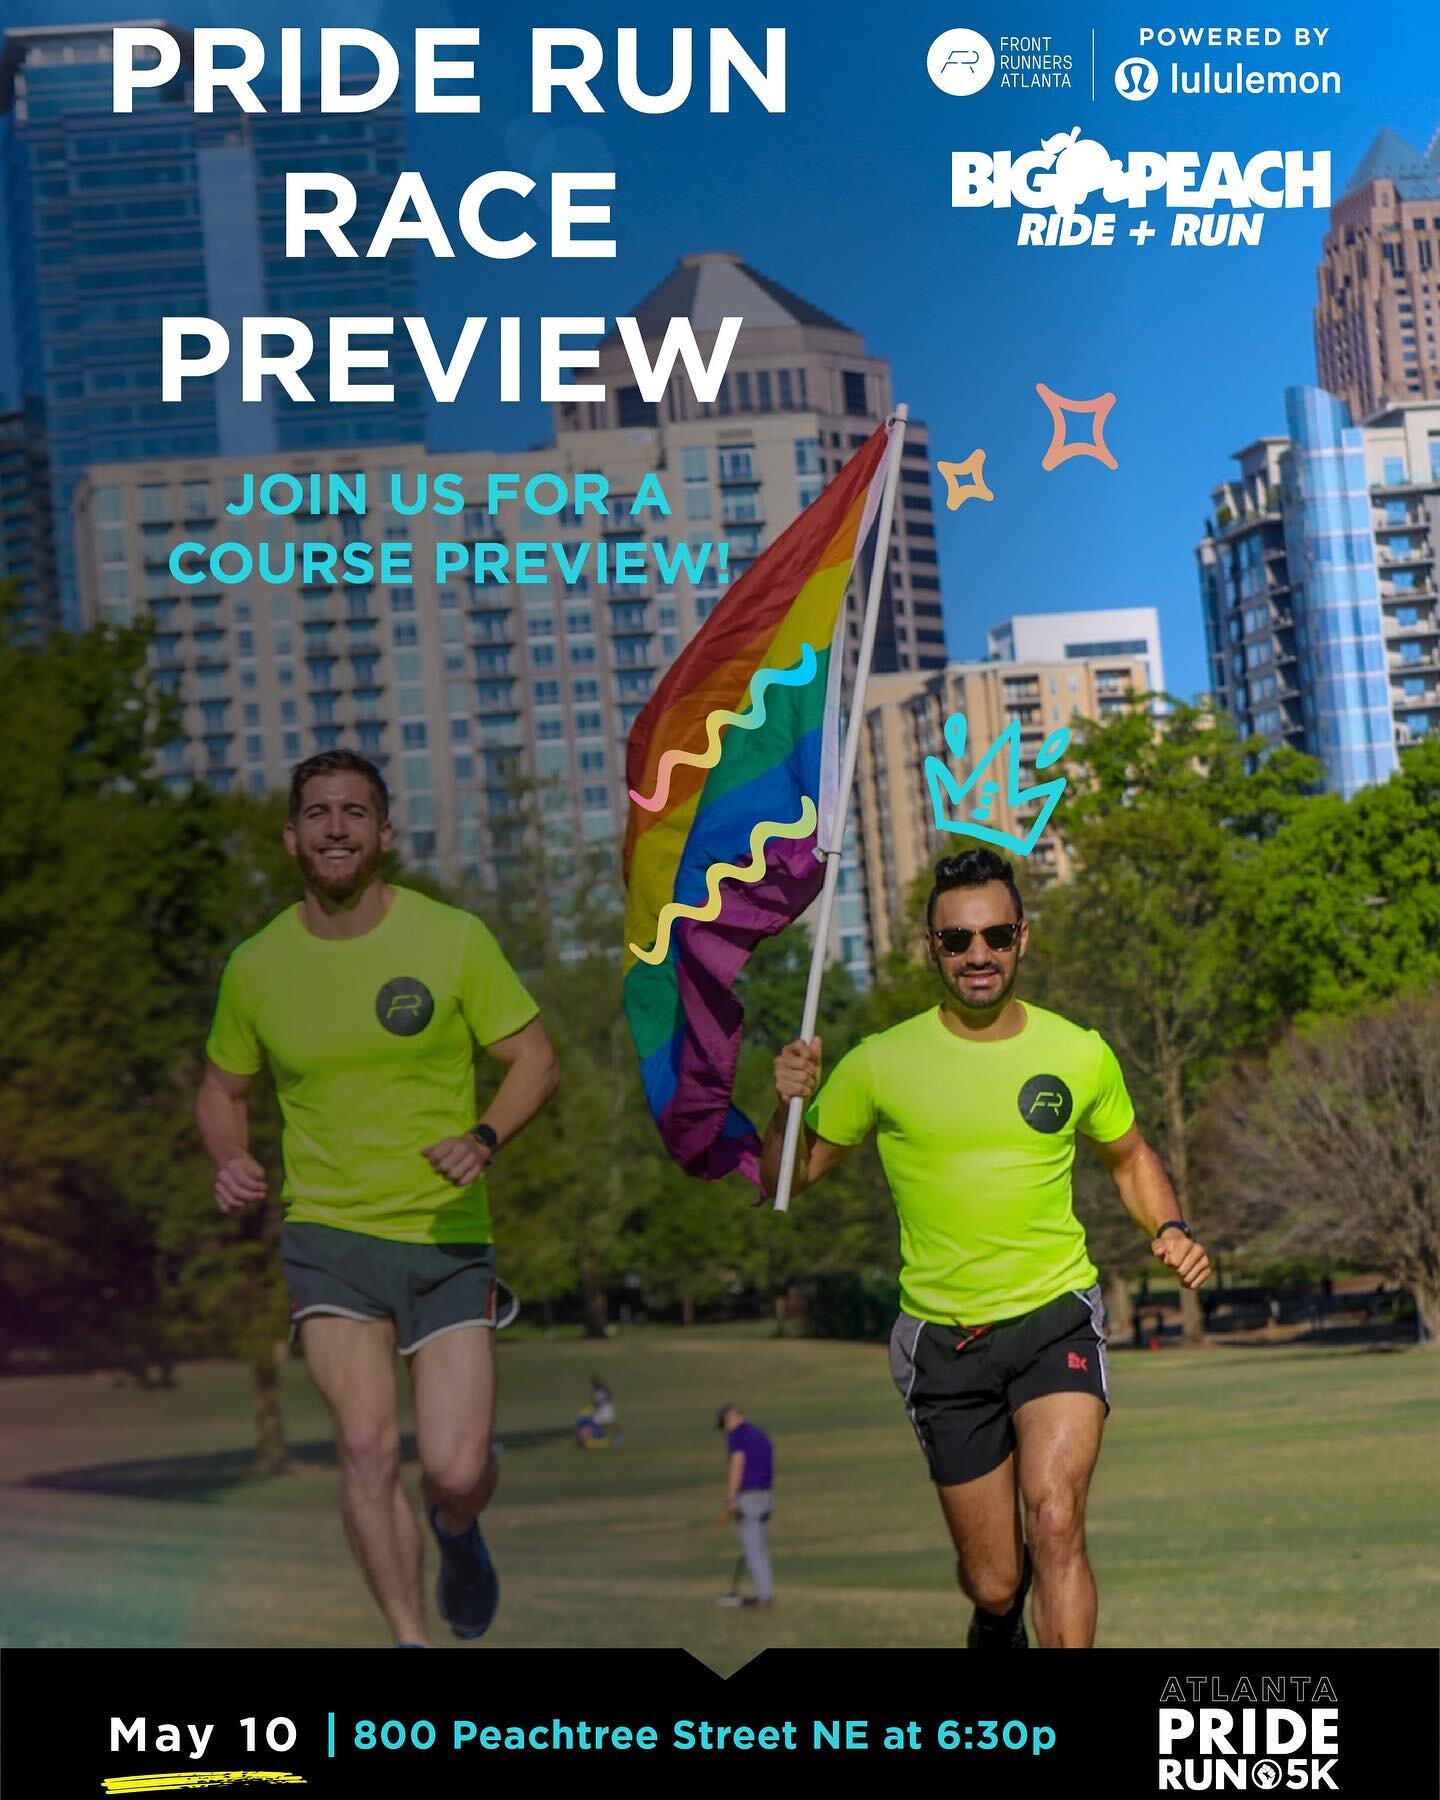 We see you, racers! Join @frontrunnersatl this Wednesday for a preview of the new Pride Run course at @bigpeach_midtown, 800 Peachtree St NE. Come out to connect with other runners and walkers and get a head start on the route before June 4th!